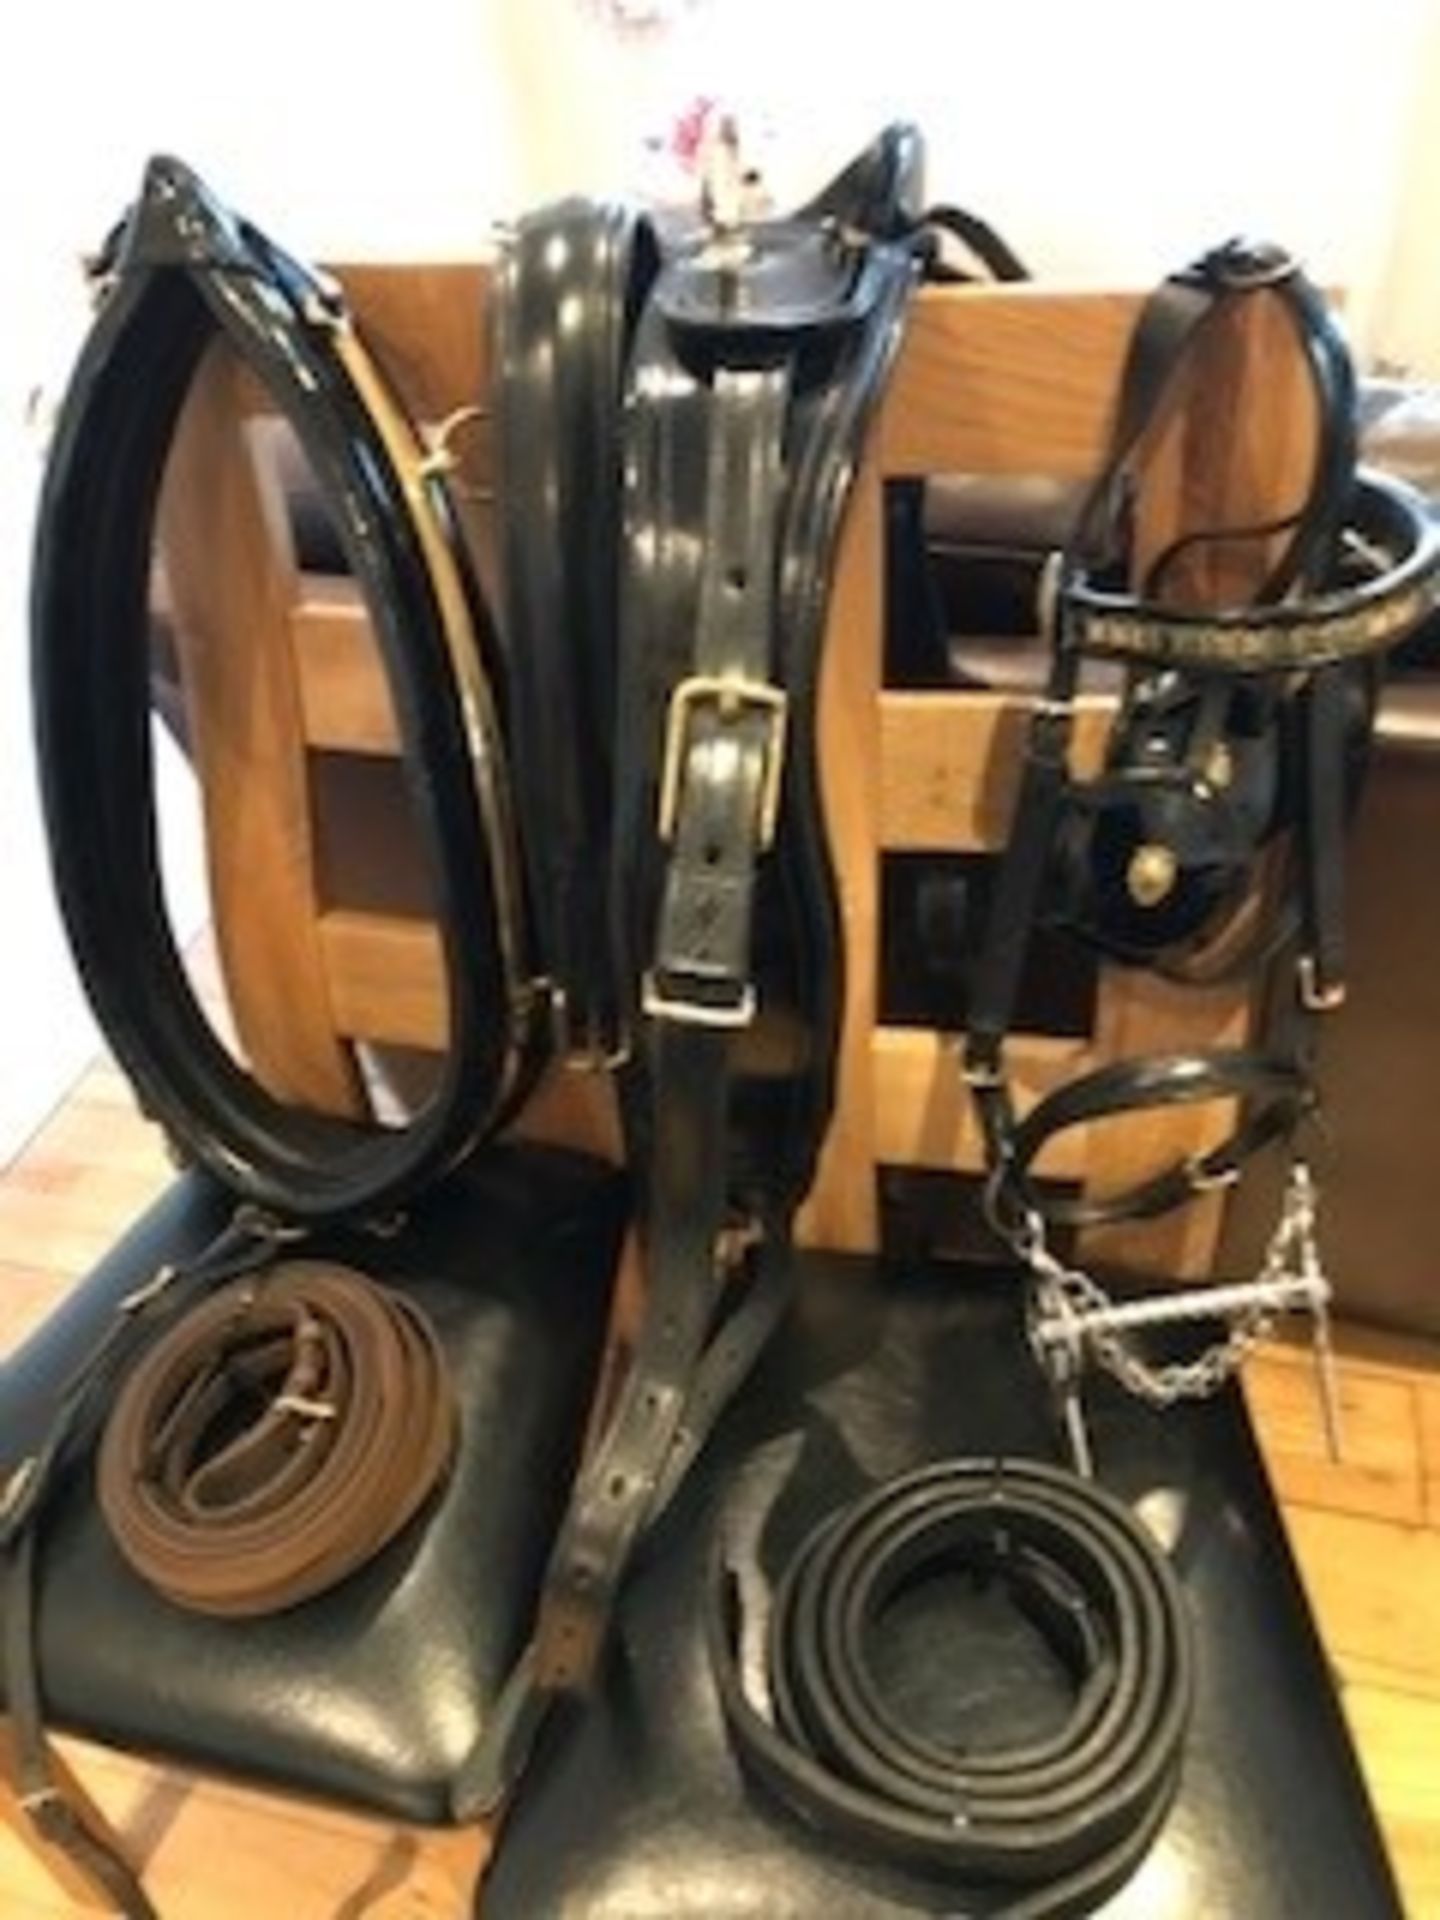 Set of Huskissons black patent leather harness with brass fittings.